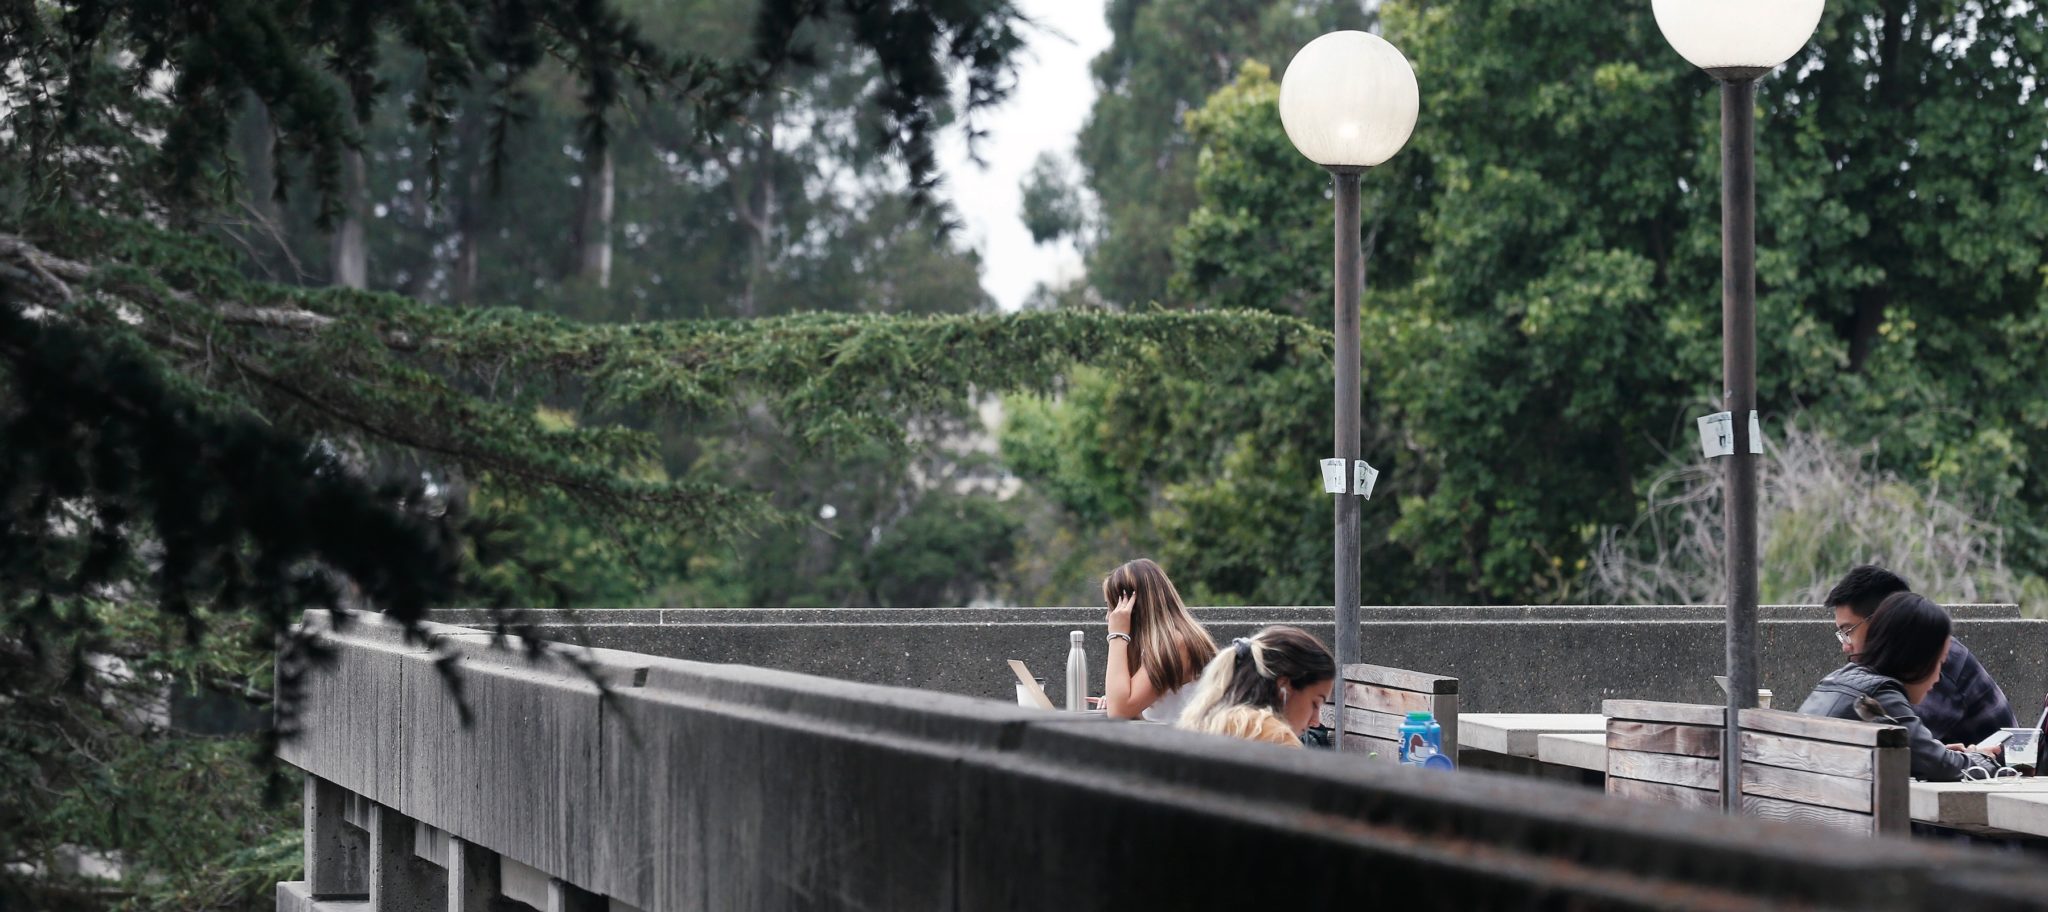 Students study on the patio of the Free Speech Movement Cafe in the Moffitt Undergraduate Library at UC Berkeley on Wednesday, Aug. 28, 2019.